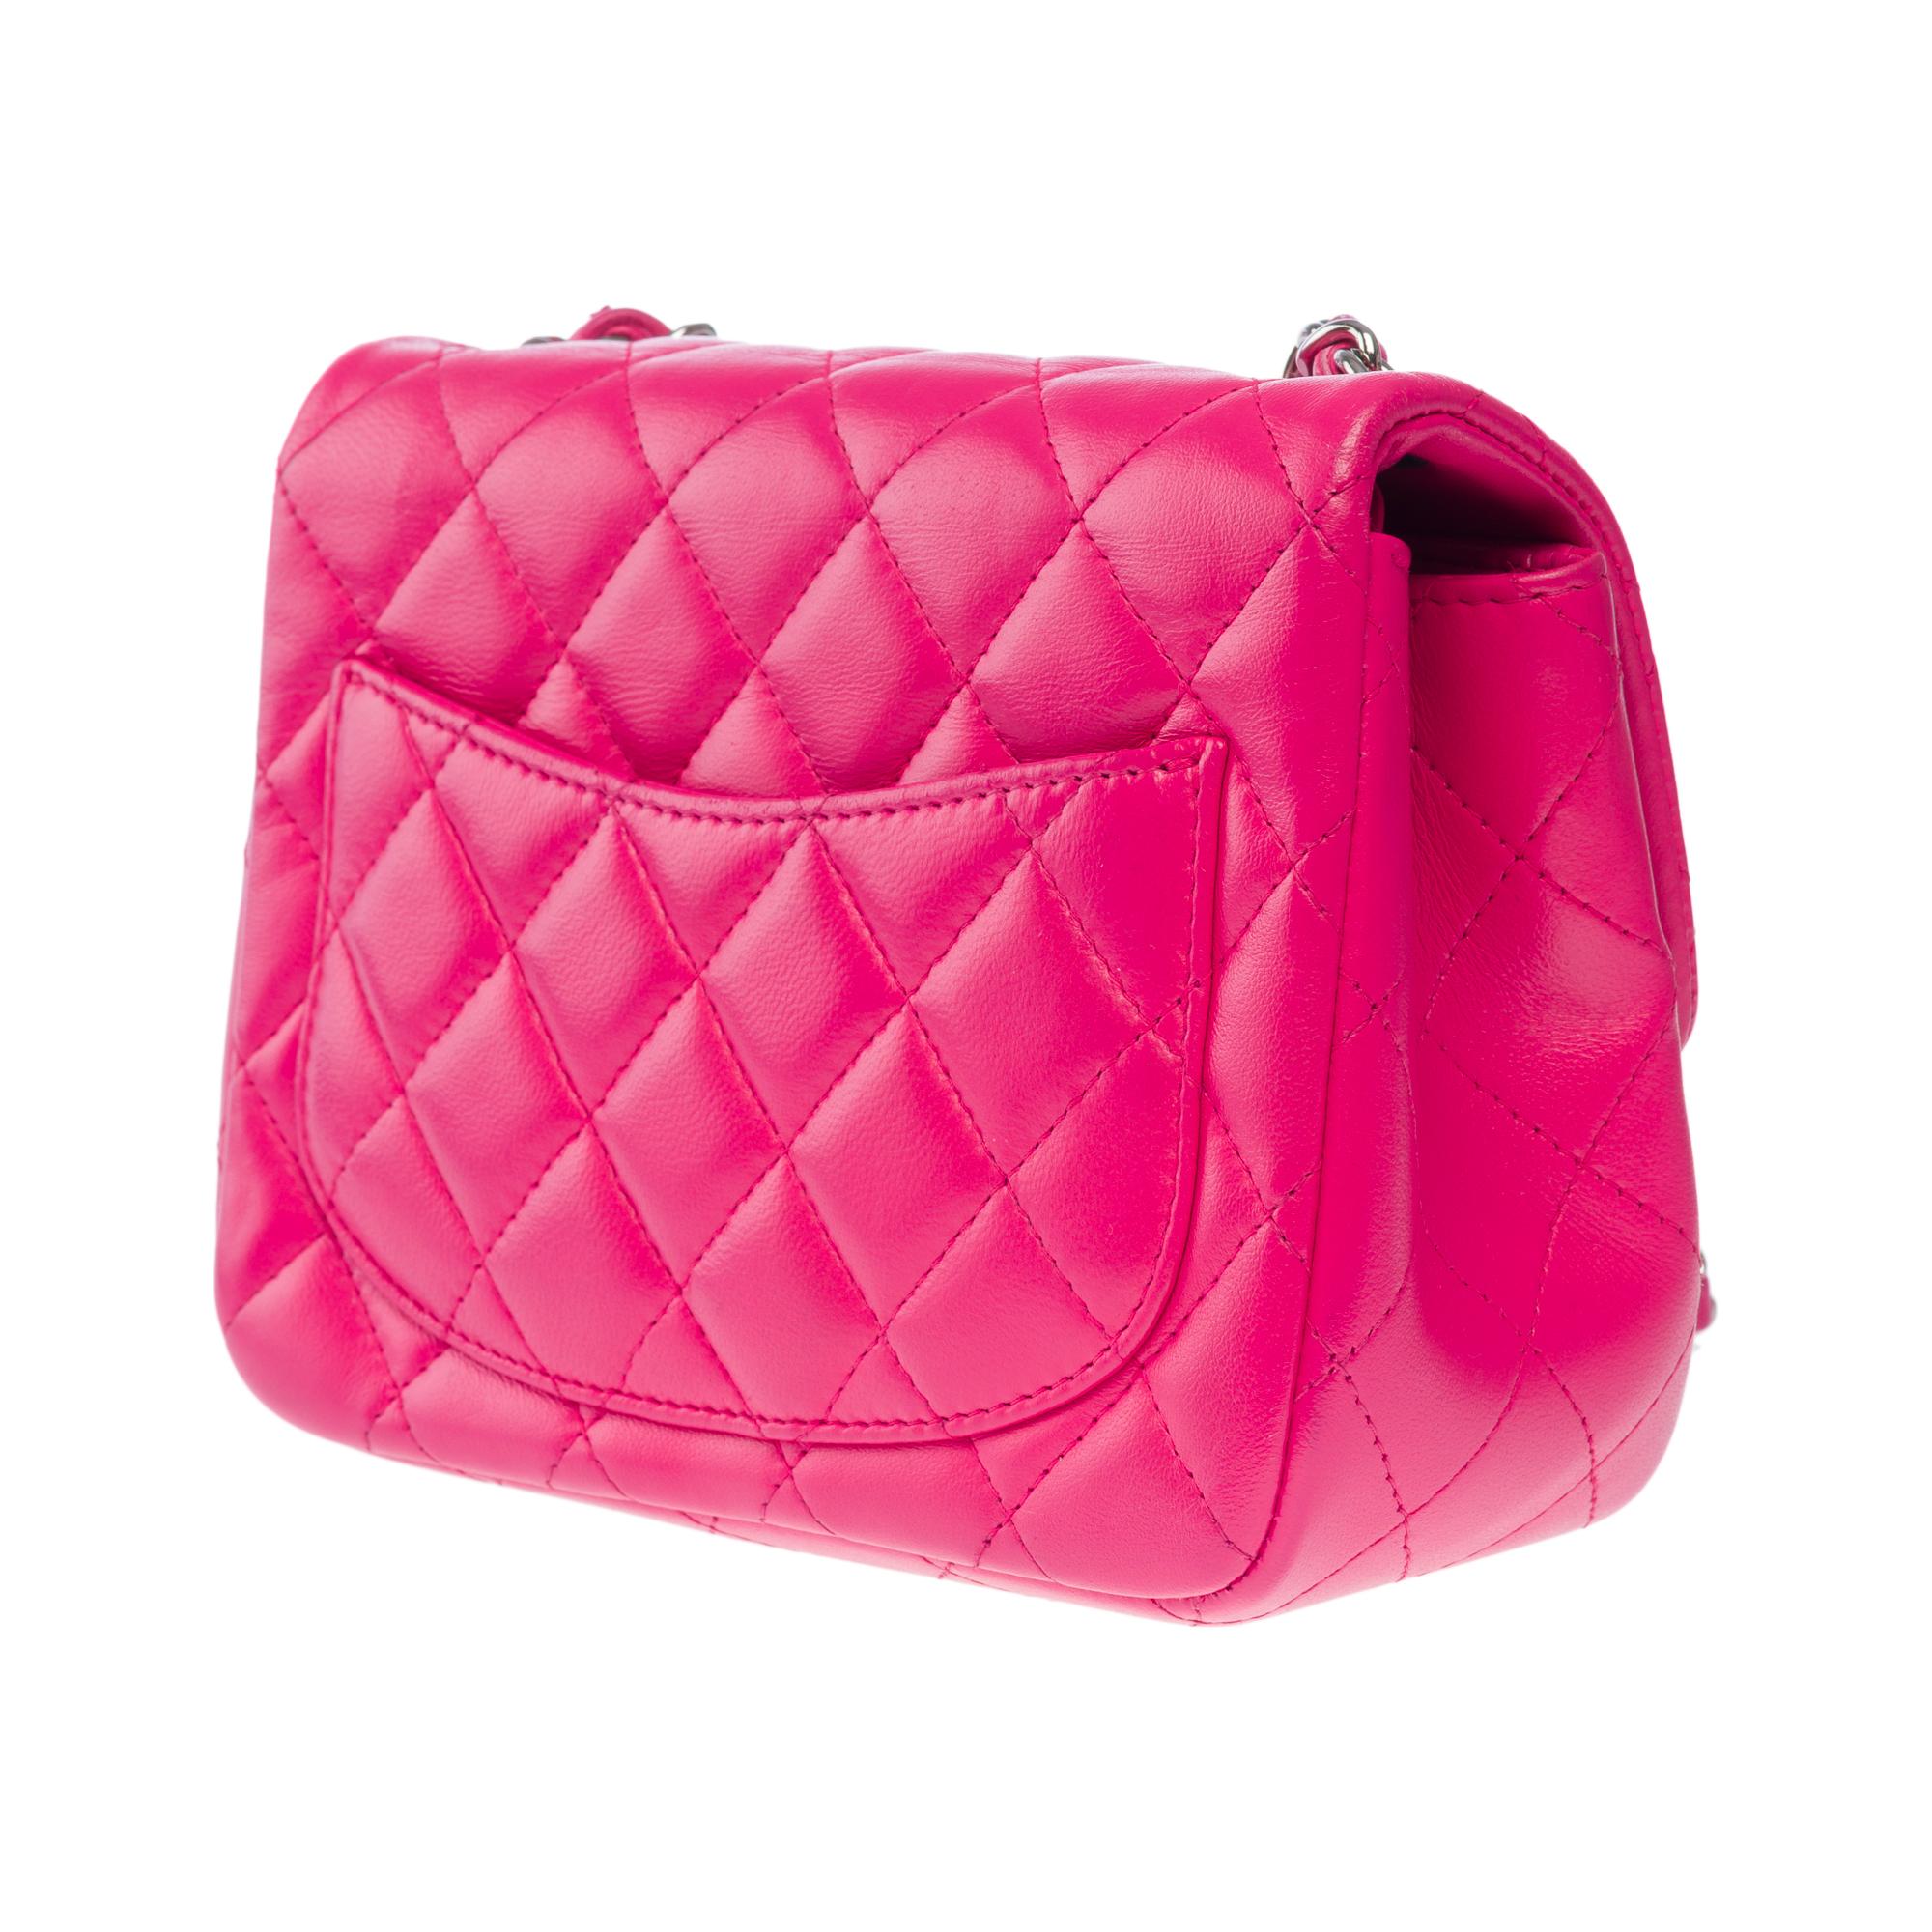 Gorgeous Chanel Mini Timeless Shoulder flap bag in Pink quilted leather, SHW 1